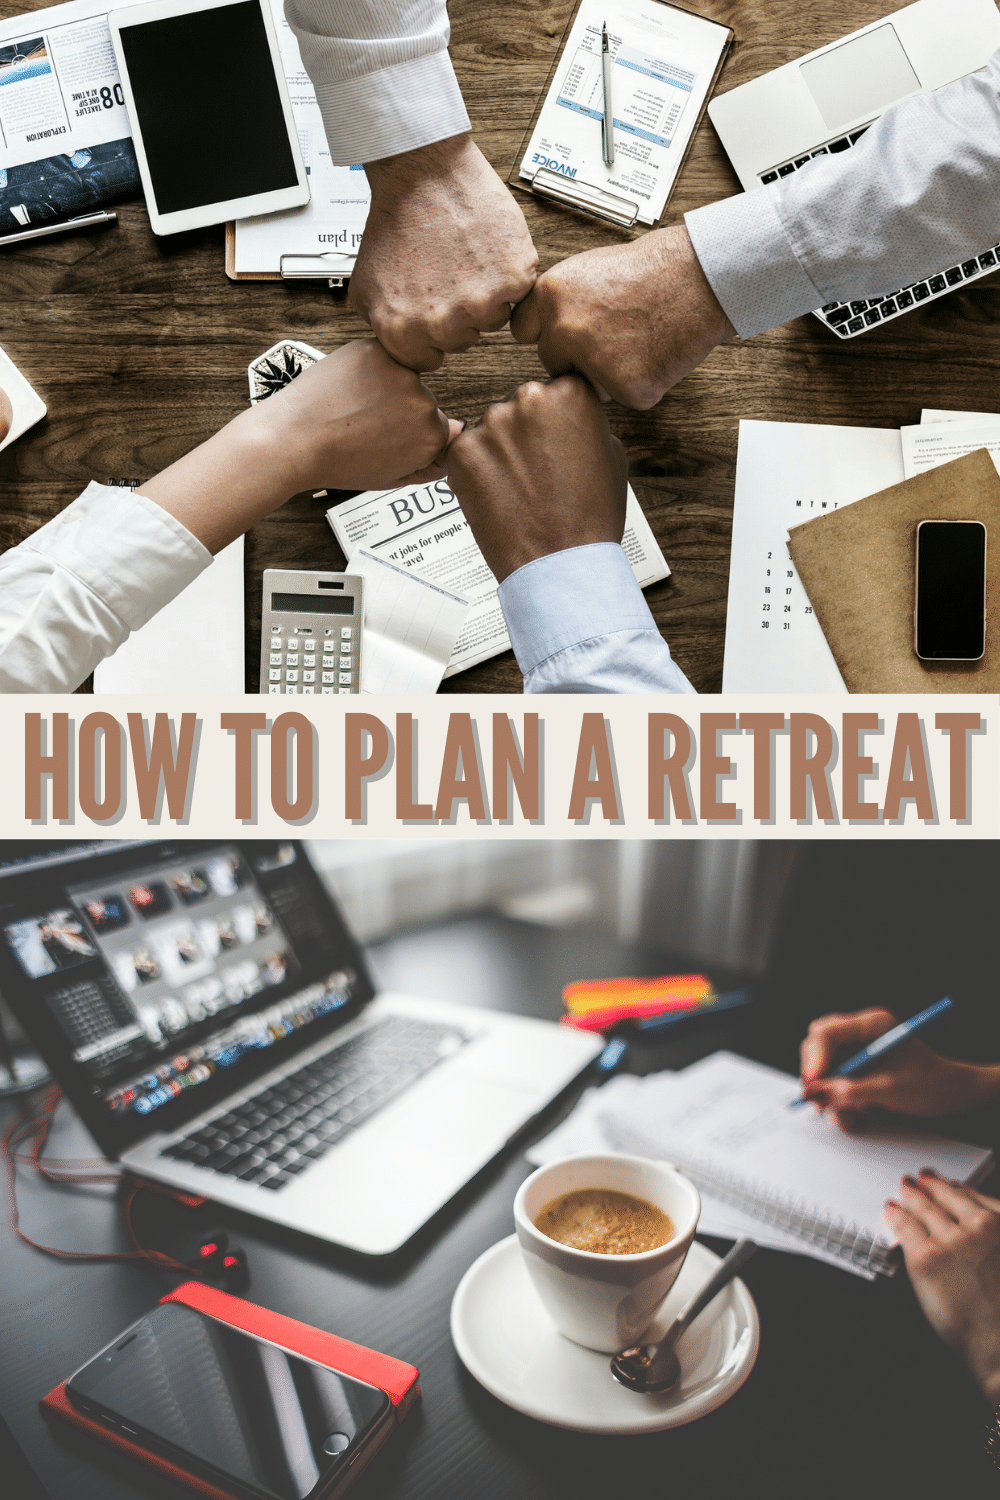 Whether you're planning a multi-day get together with distant friends, a training event for volunteers or staff, or a mastermind retreat, this simple 7-step process will teach you how to plan a retreat that is a complete success! #retreat #eventorganizer #mastermind #gettogethers via @wondermomwannab